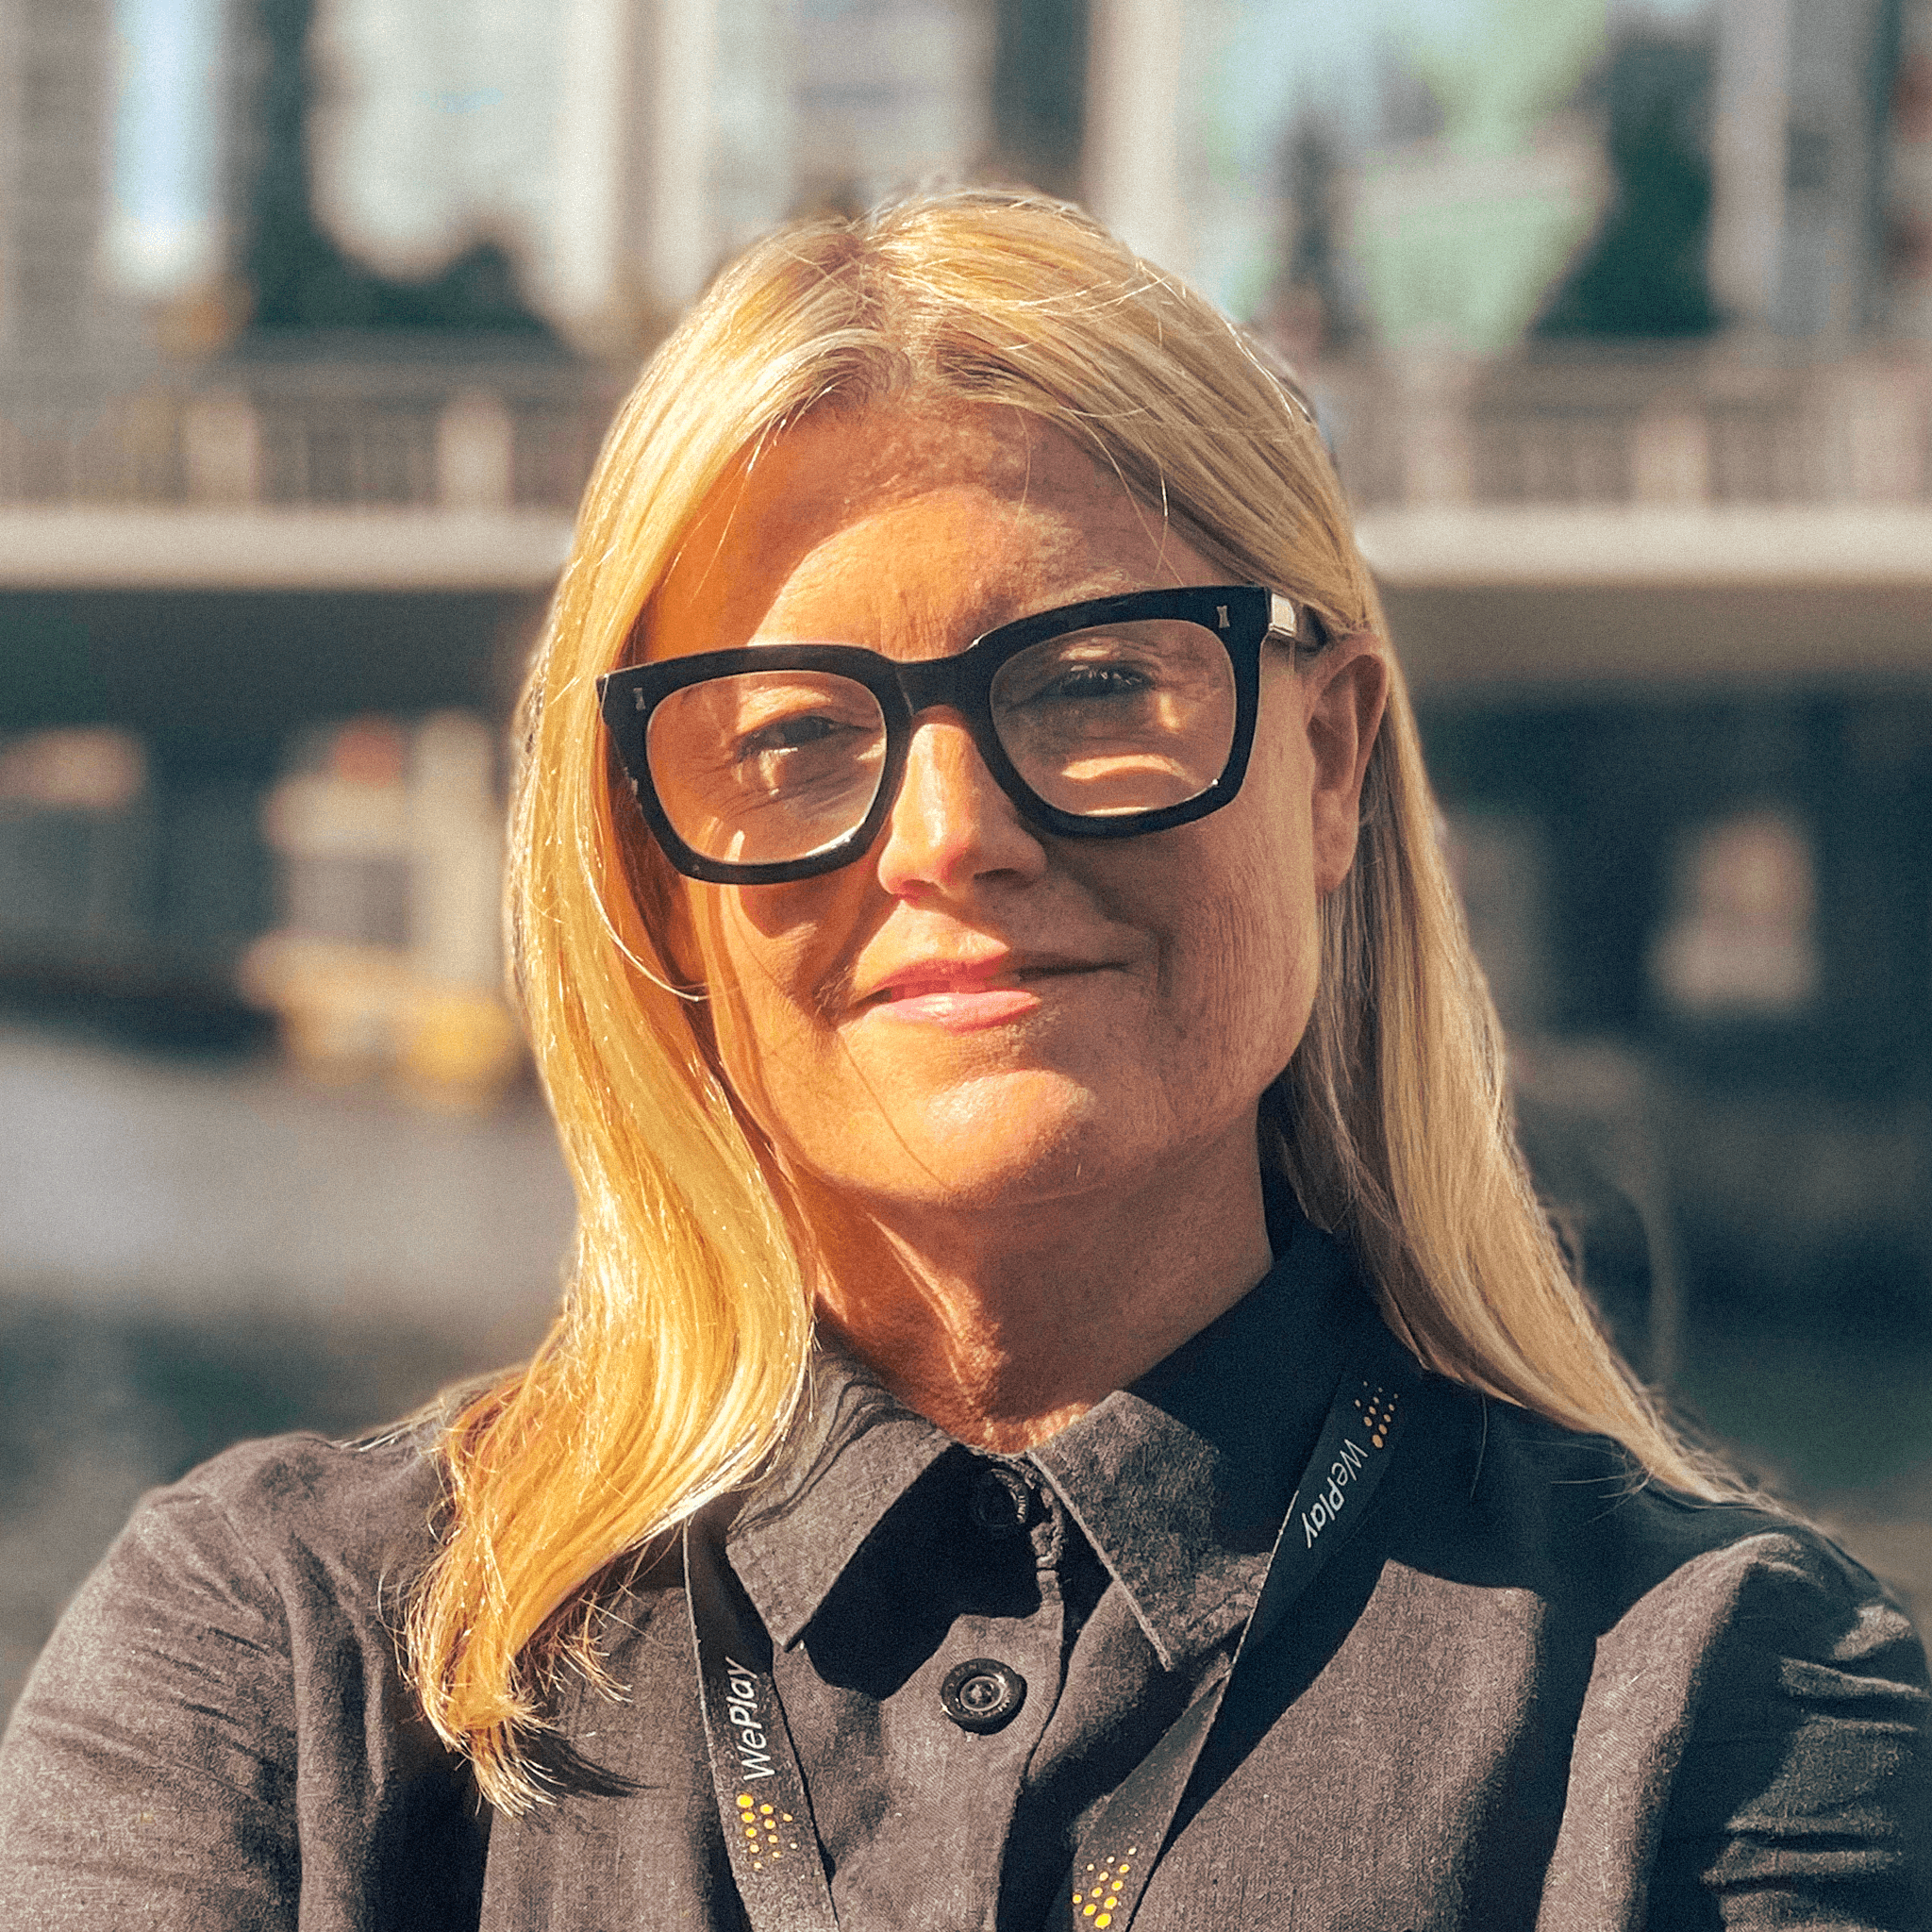 Woman with blonde hair and glasses